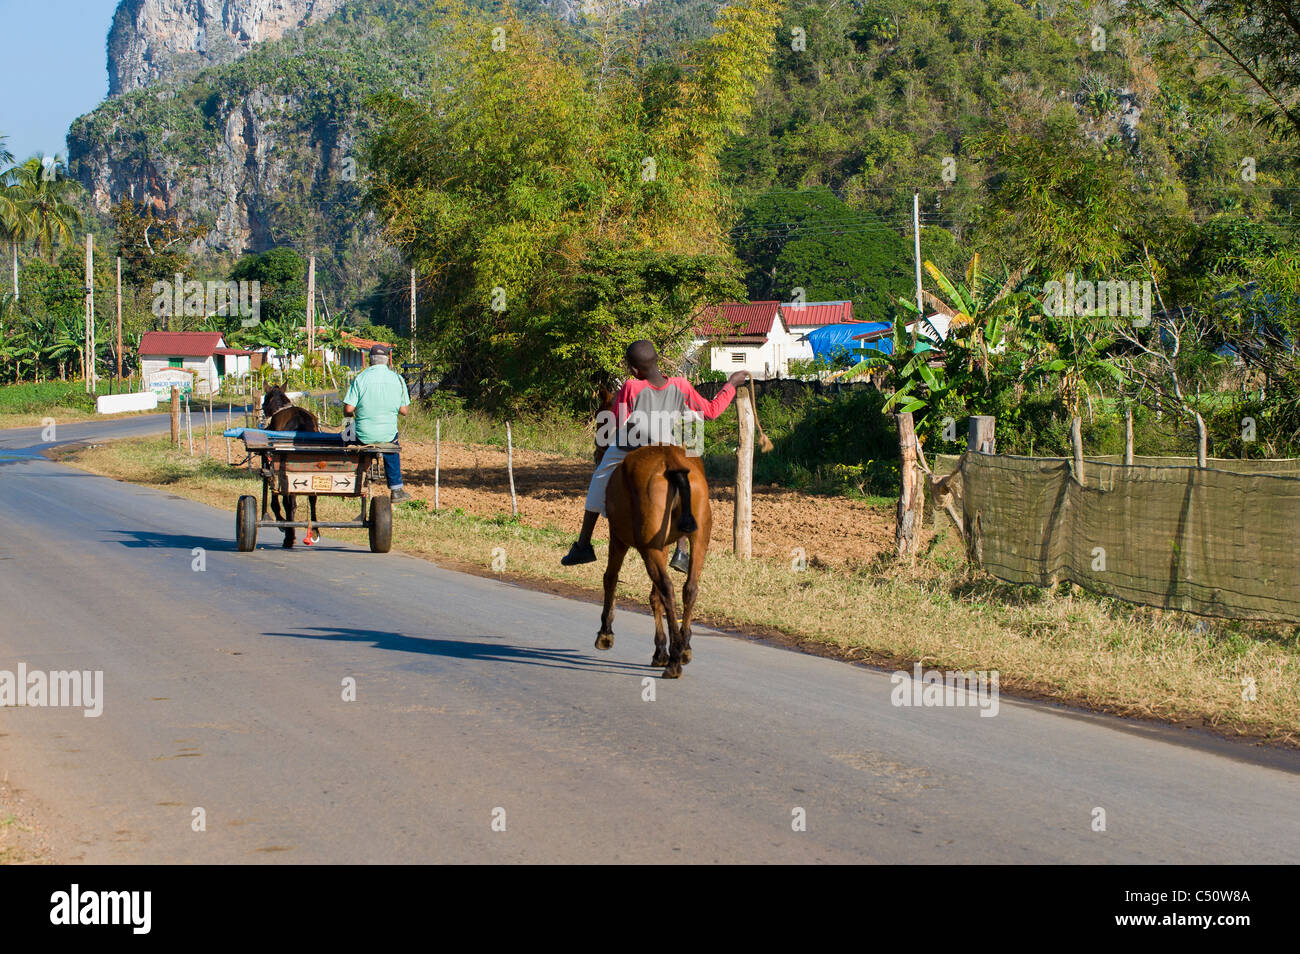 One boy riding a horse and one man on a horse cart, Vinales, Pinar del Rio Province, Cuba Stock Photo